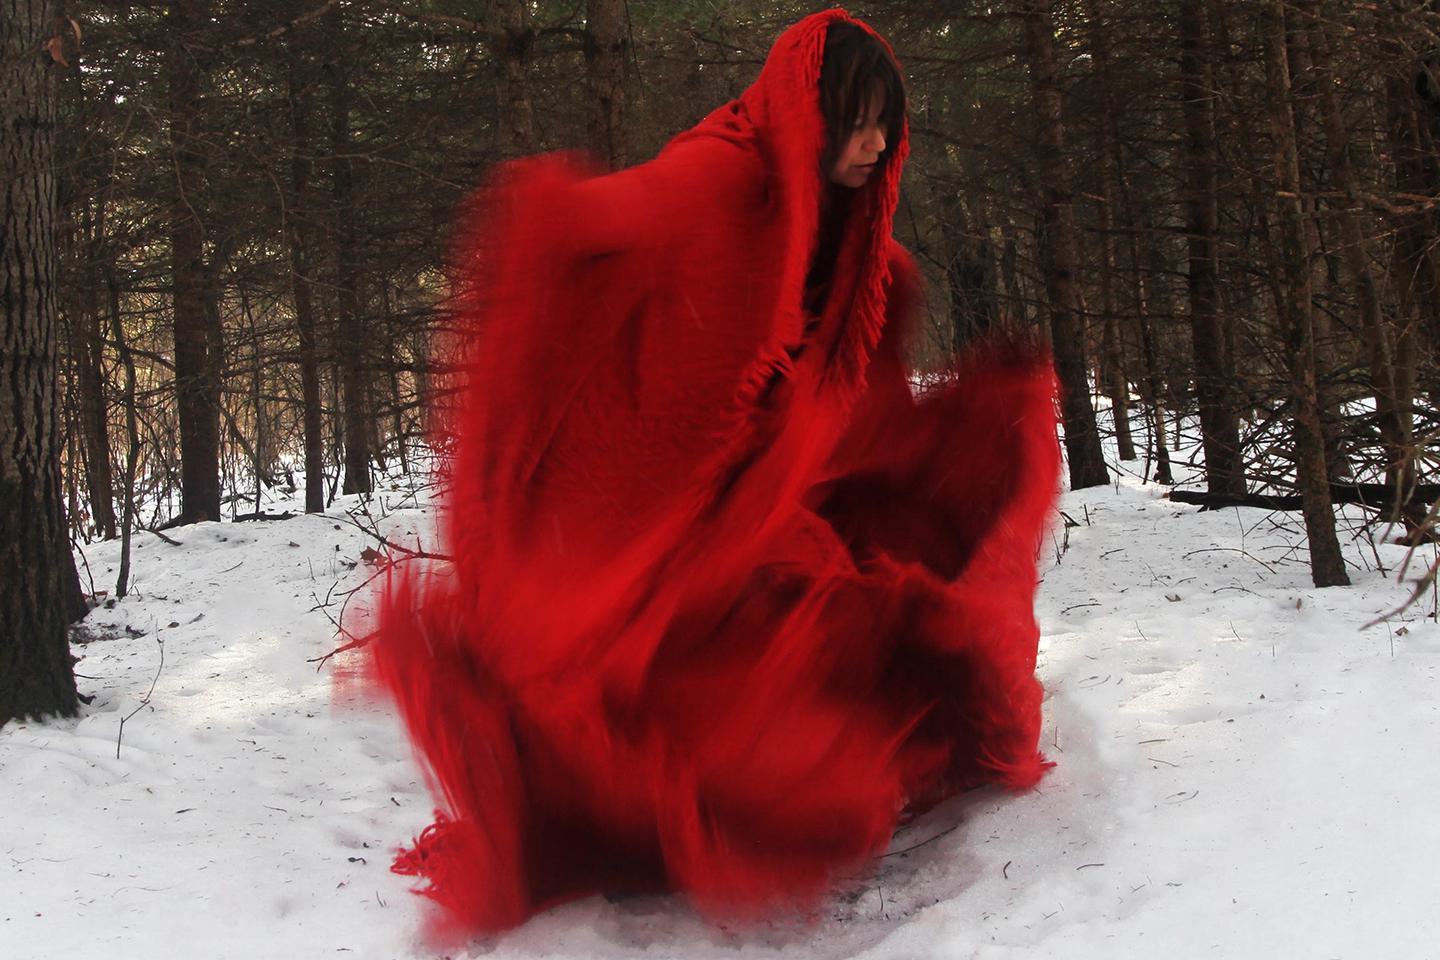 A photo shows a woman in movement, wearing a red blanket-like dress and surrounded by trees with snow on the ground.